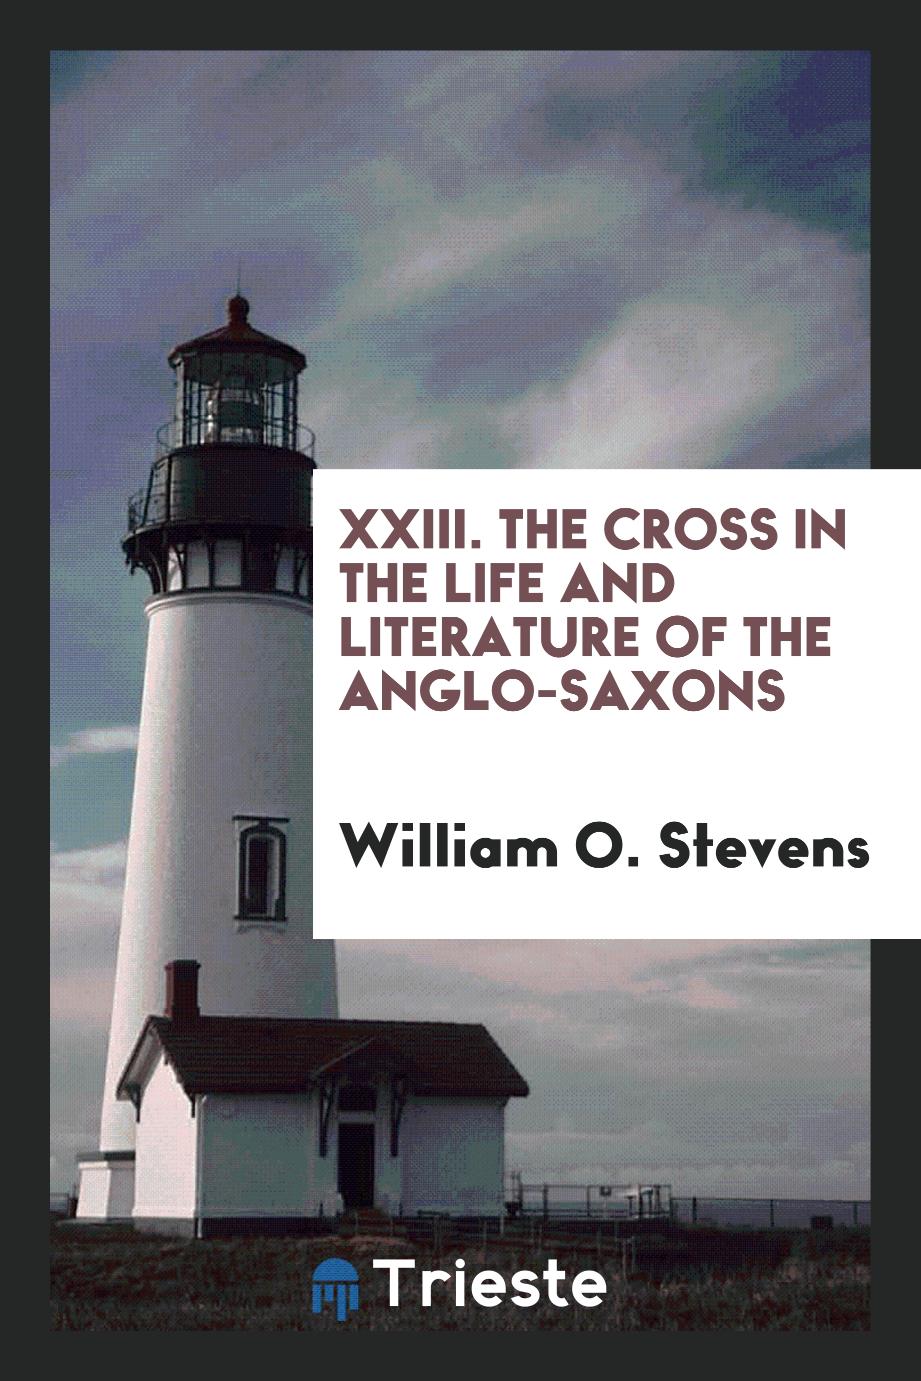 XXIII. The Cross in the Life and Literature of the Anglo-Saxons